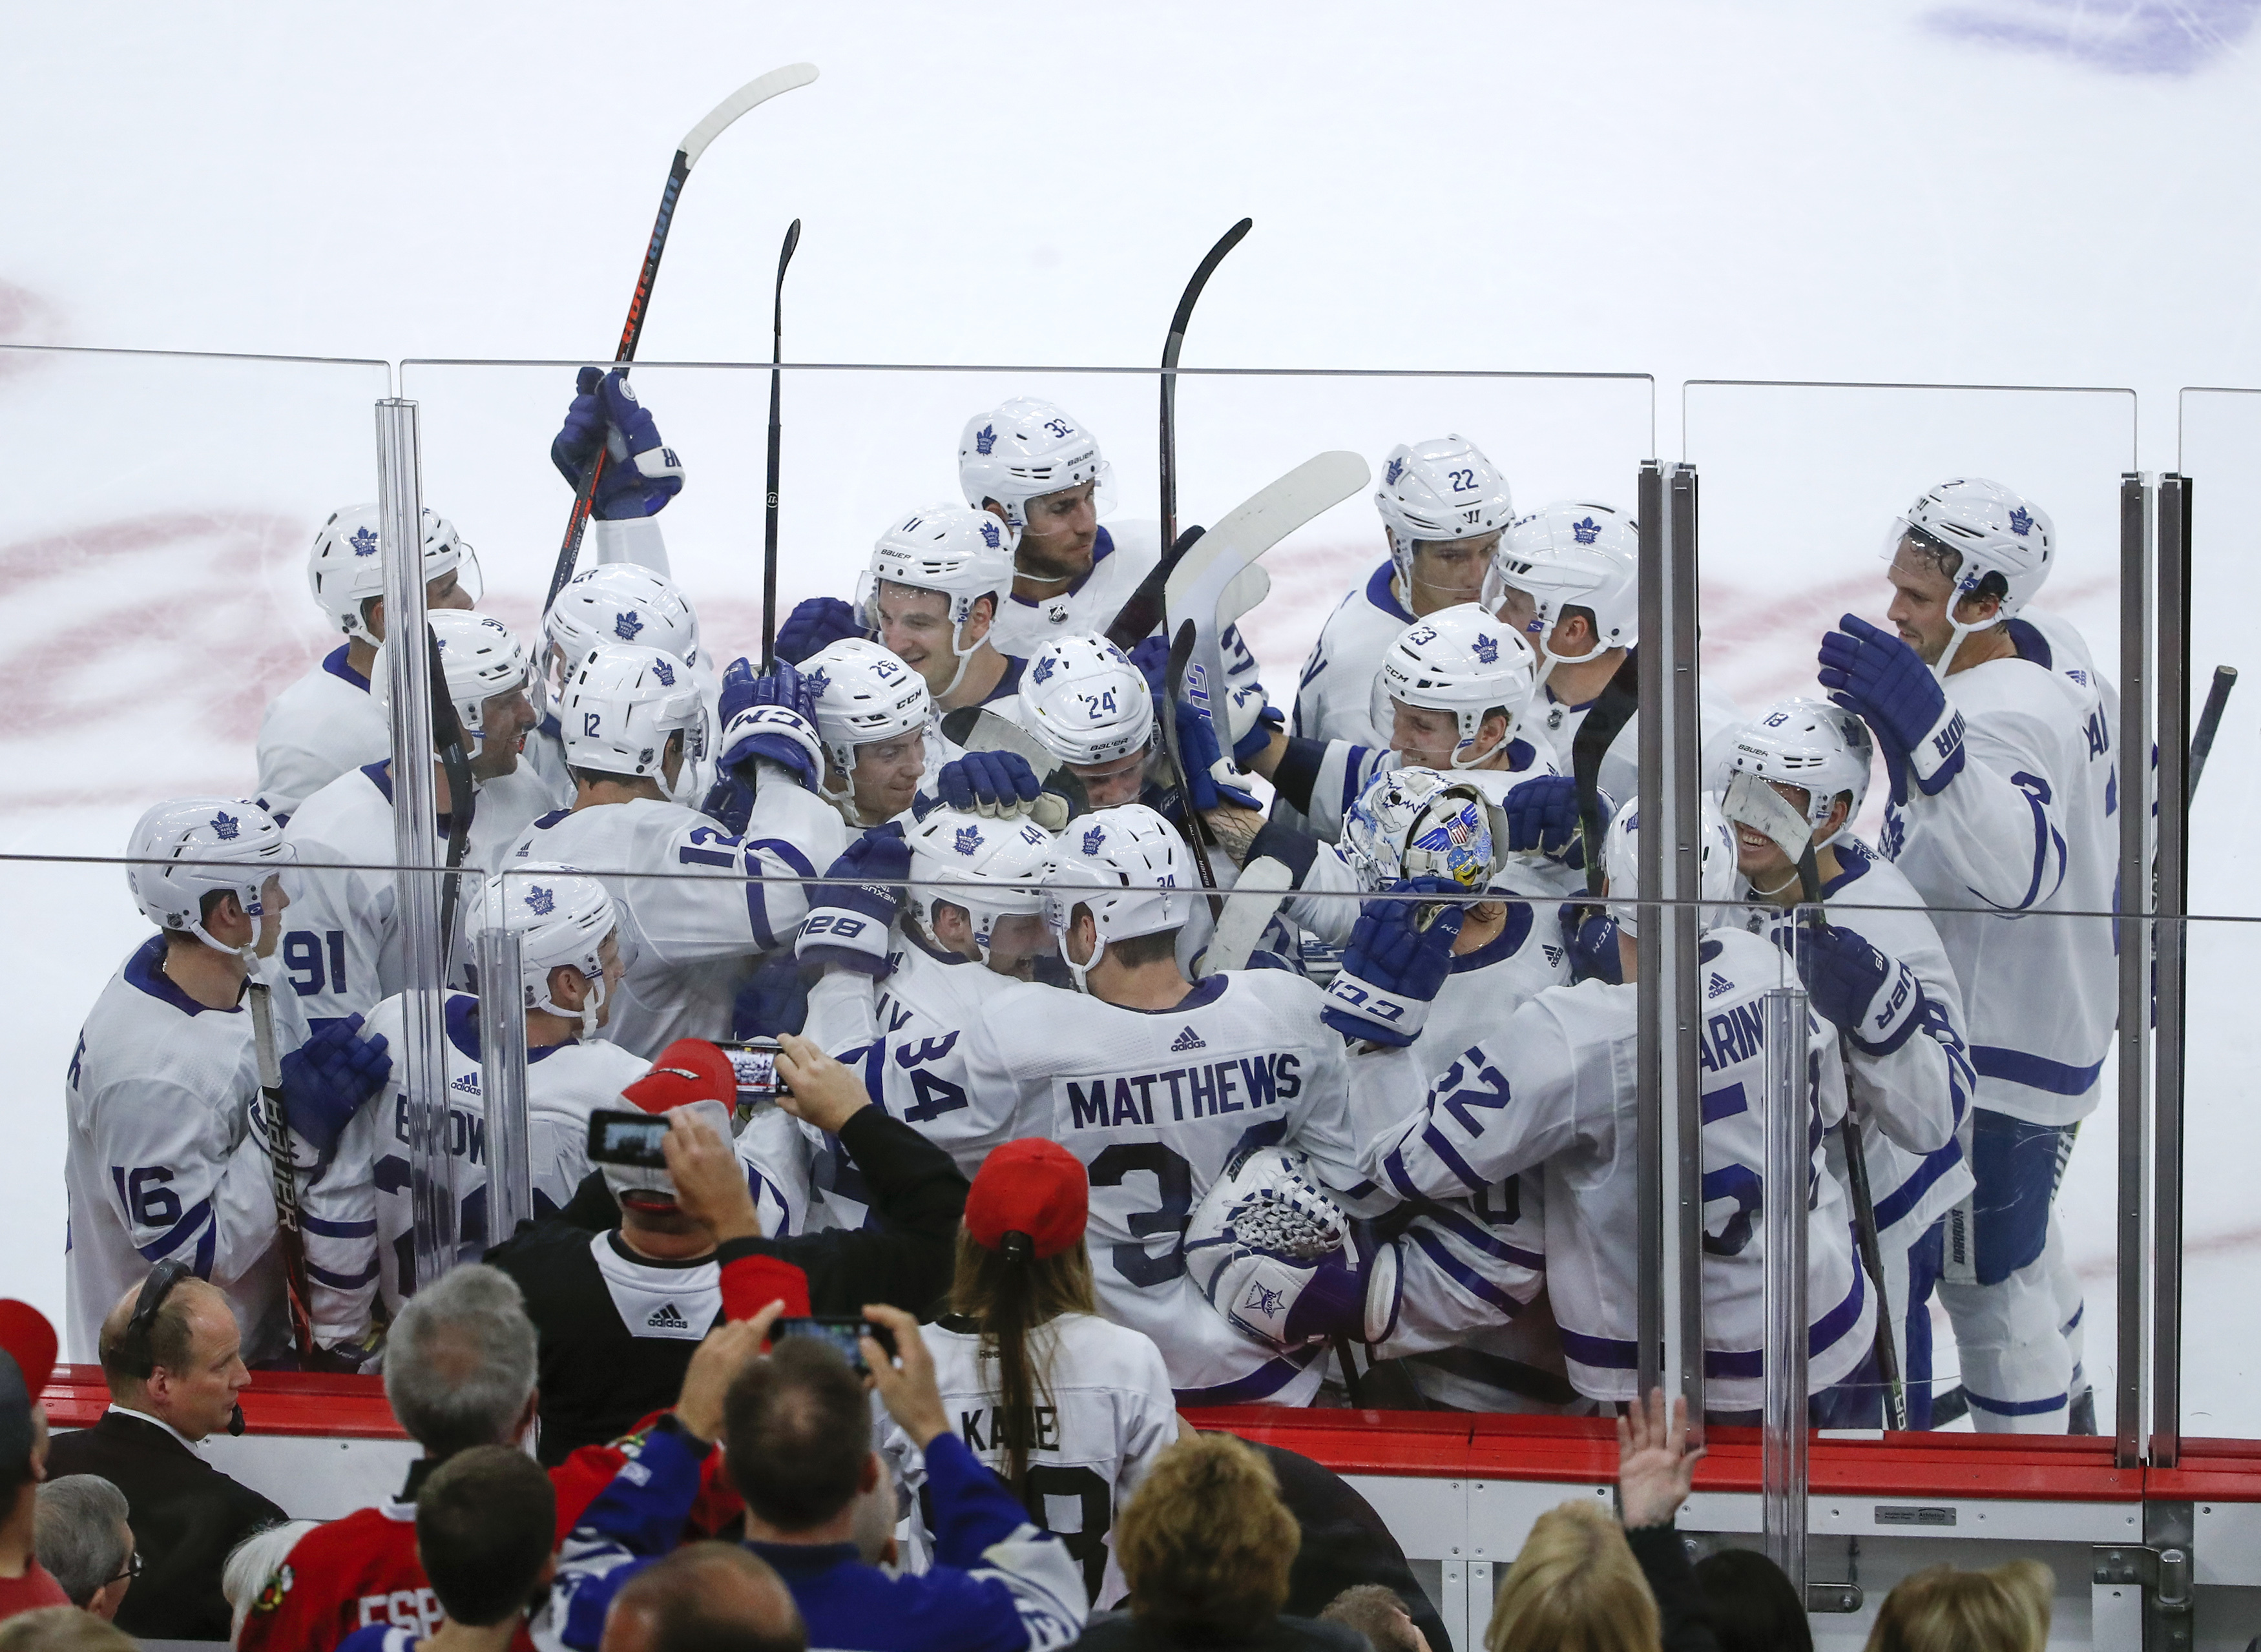 Rielly’s OT goal gives Maple Leafs 7-6 win over Blackhawks